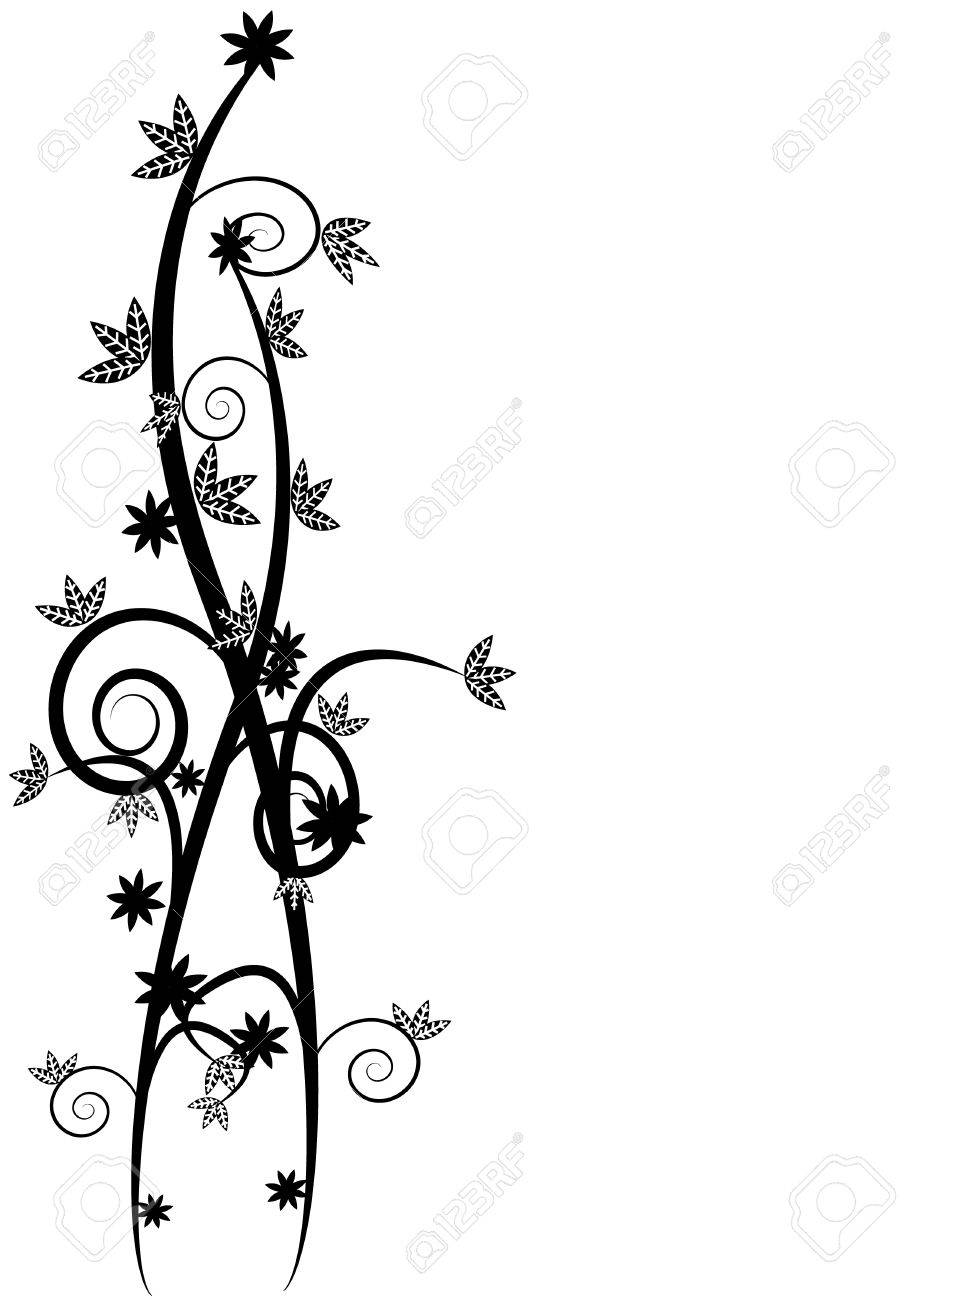 Floral Vines Background With Space To Insert Your Own Text Royalty